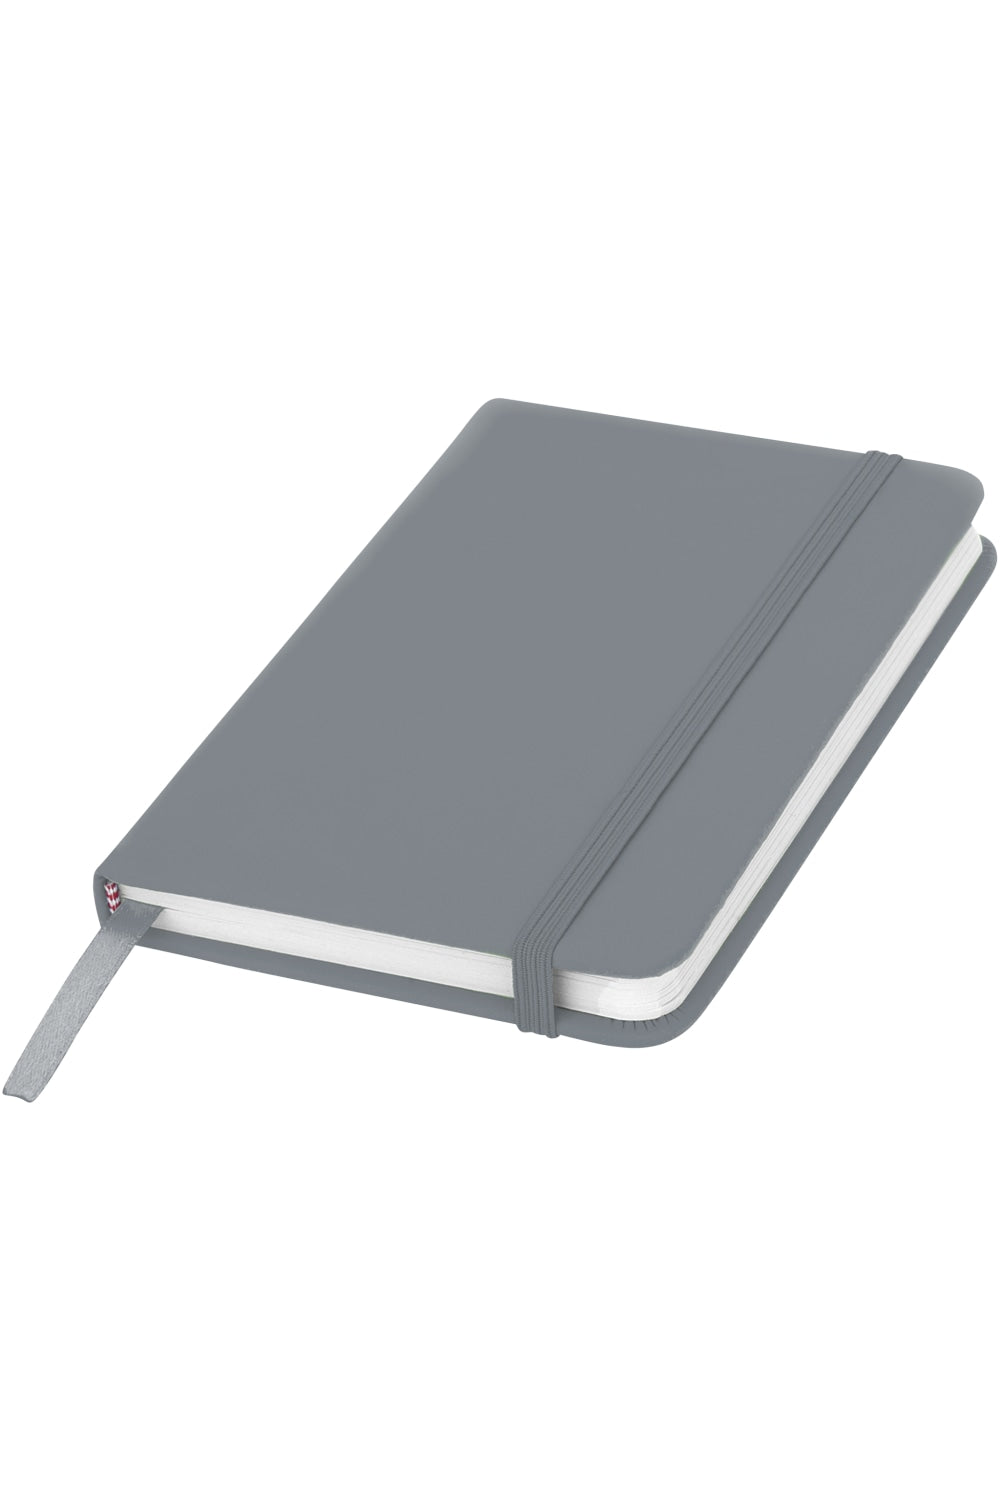 Bullet Spectrum A6 Notebook (Pack of 2) (Silver) (5.5 x 3.5 x 0.5 inches)